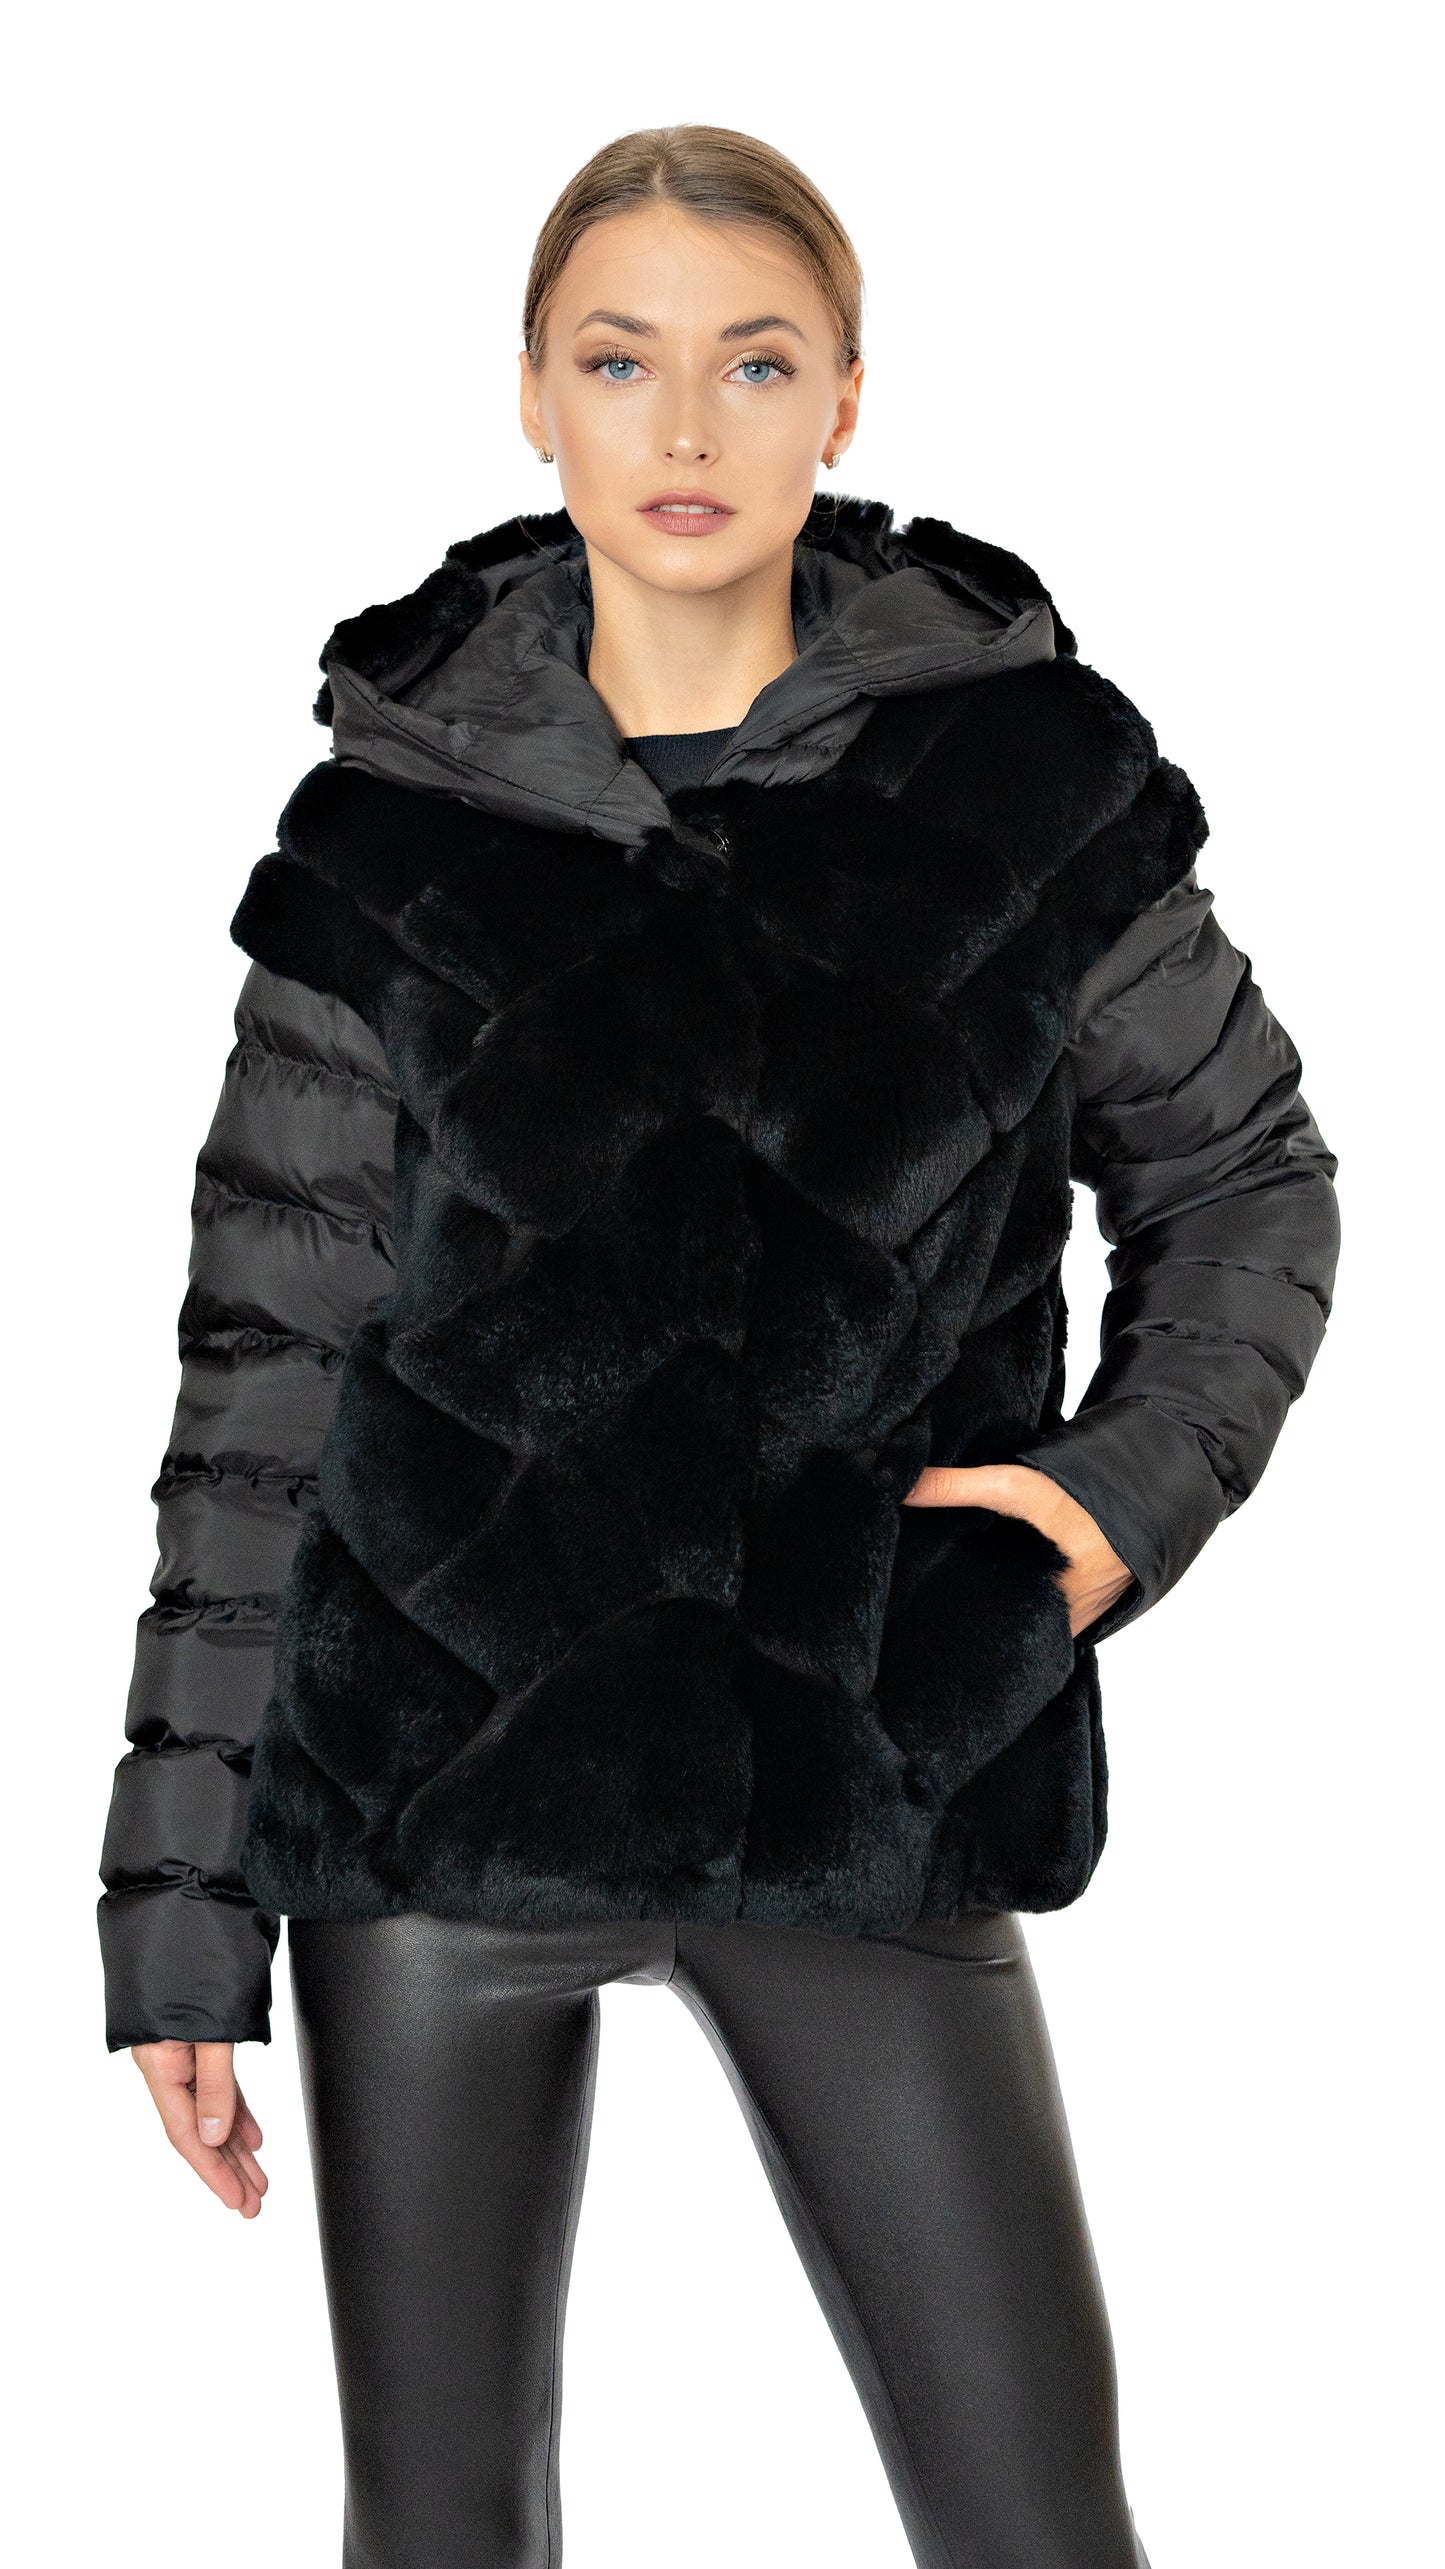 Rizal puffer jacket with rex fur details with hood in black